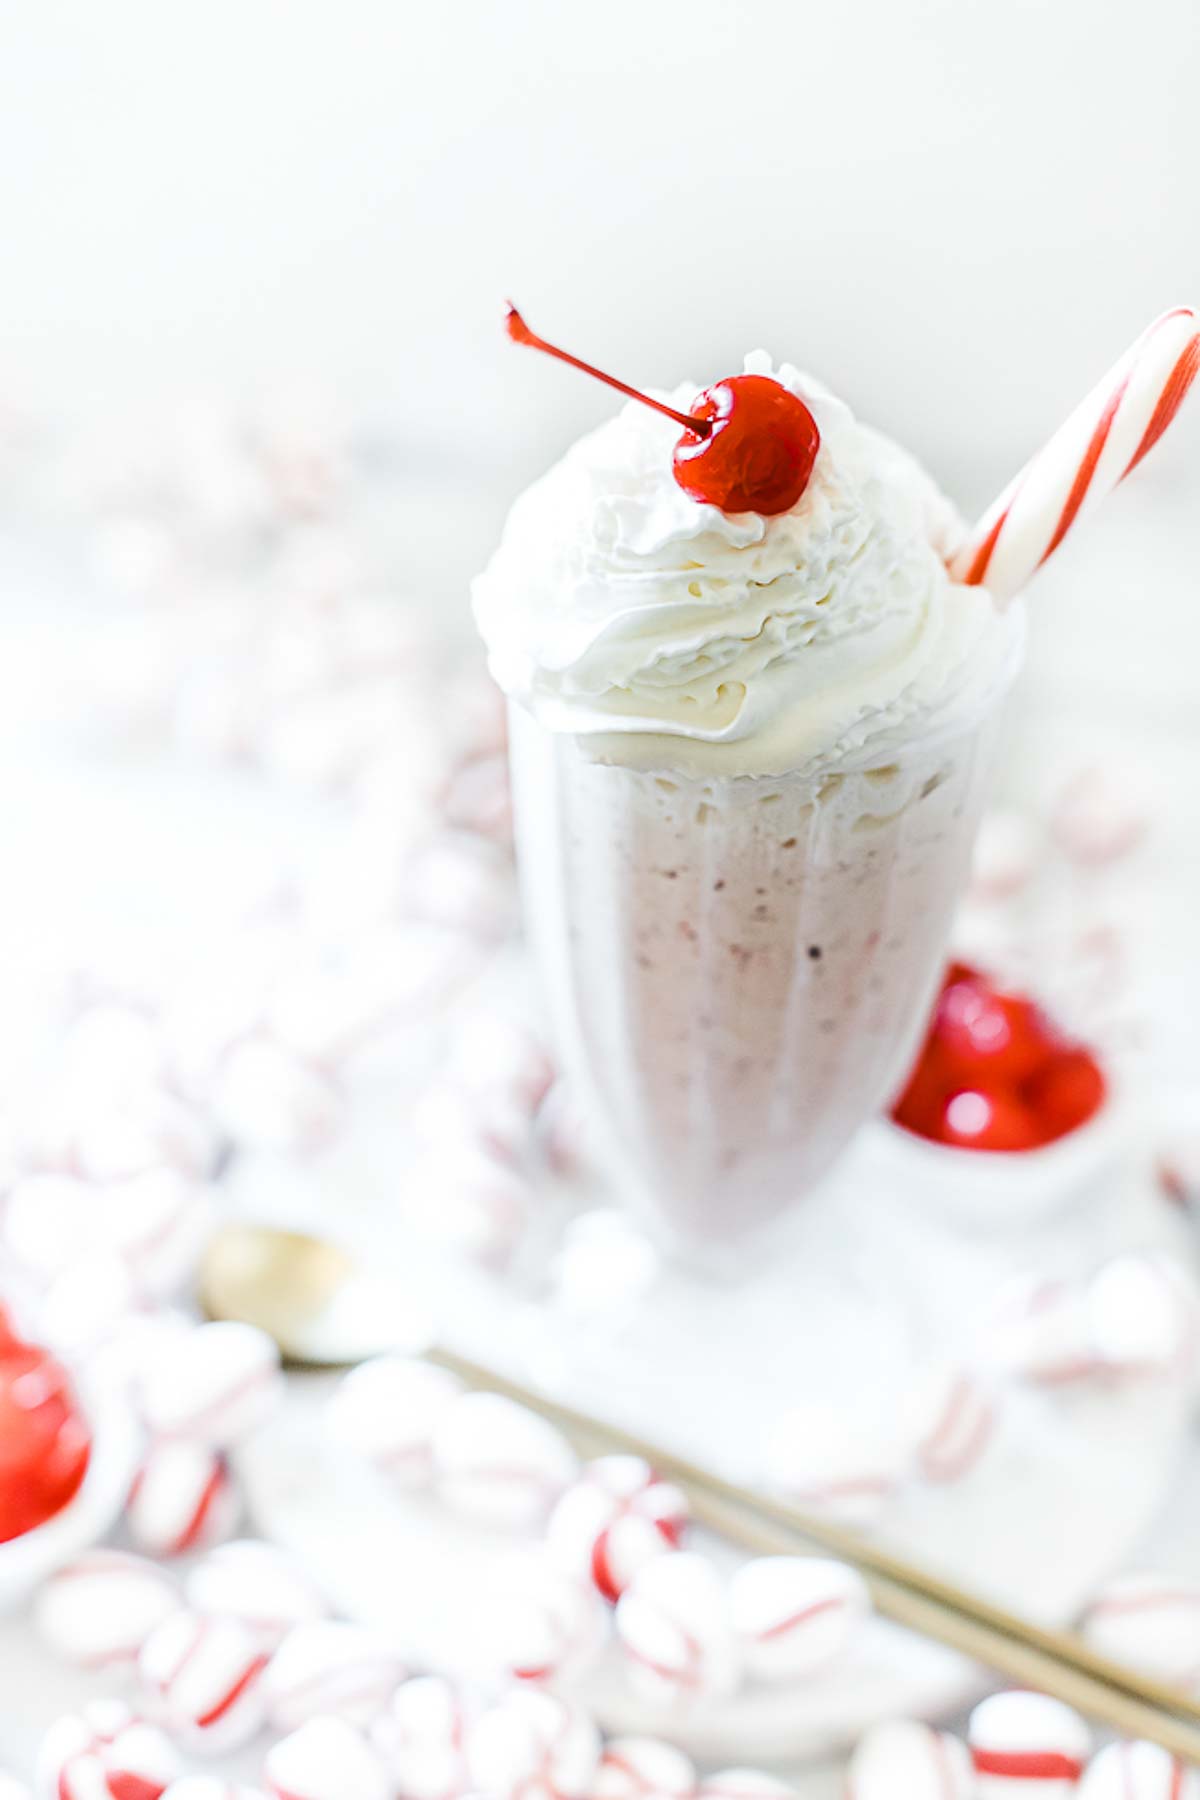 A single sundae glass filled with peppermint shake, whipped cream, and a cherry.